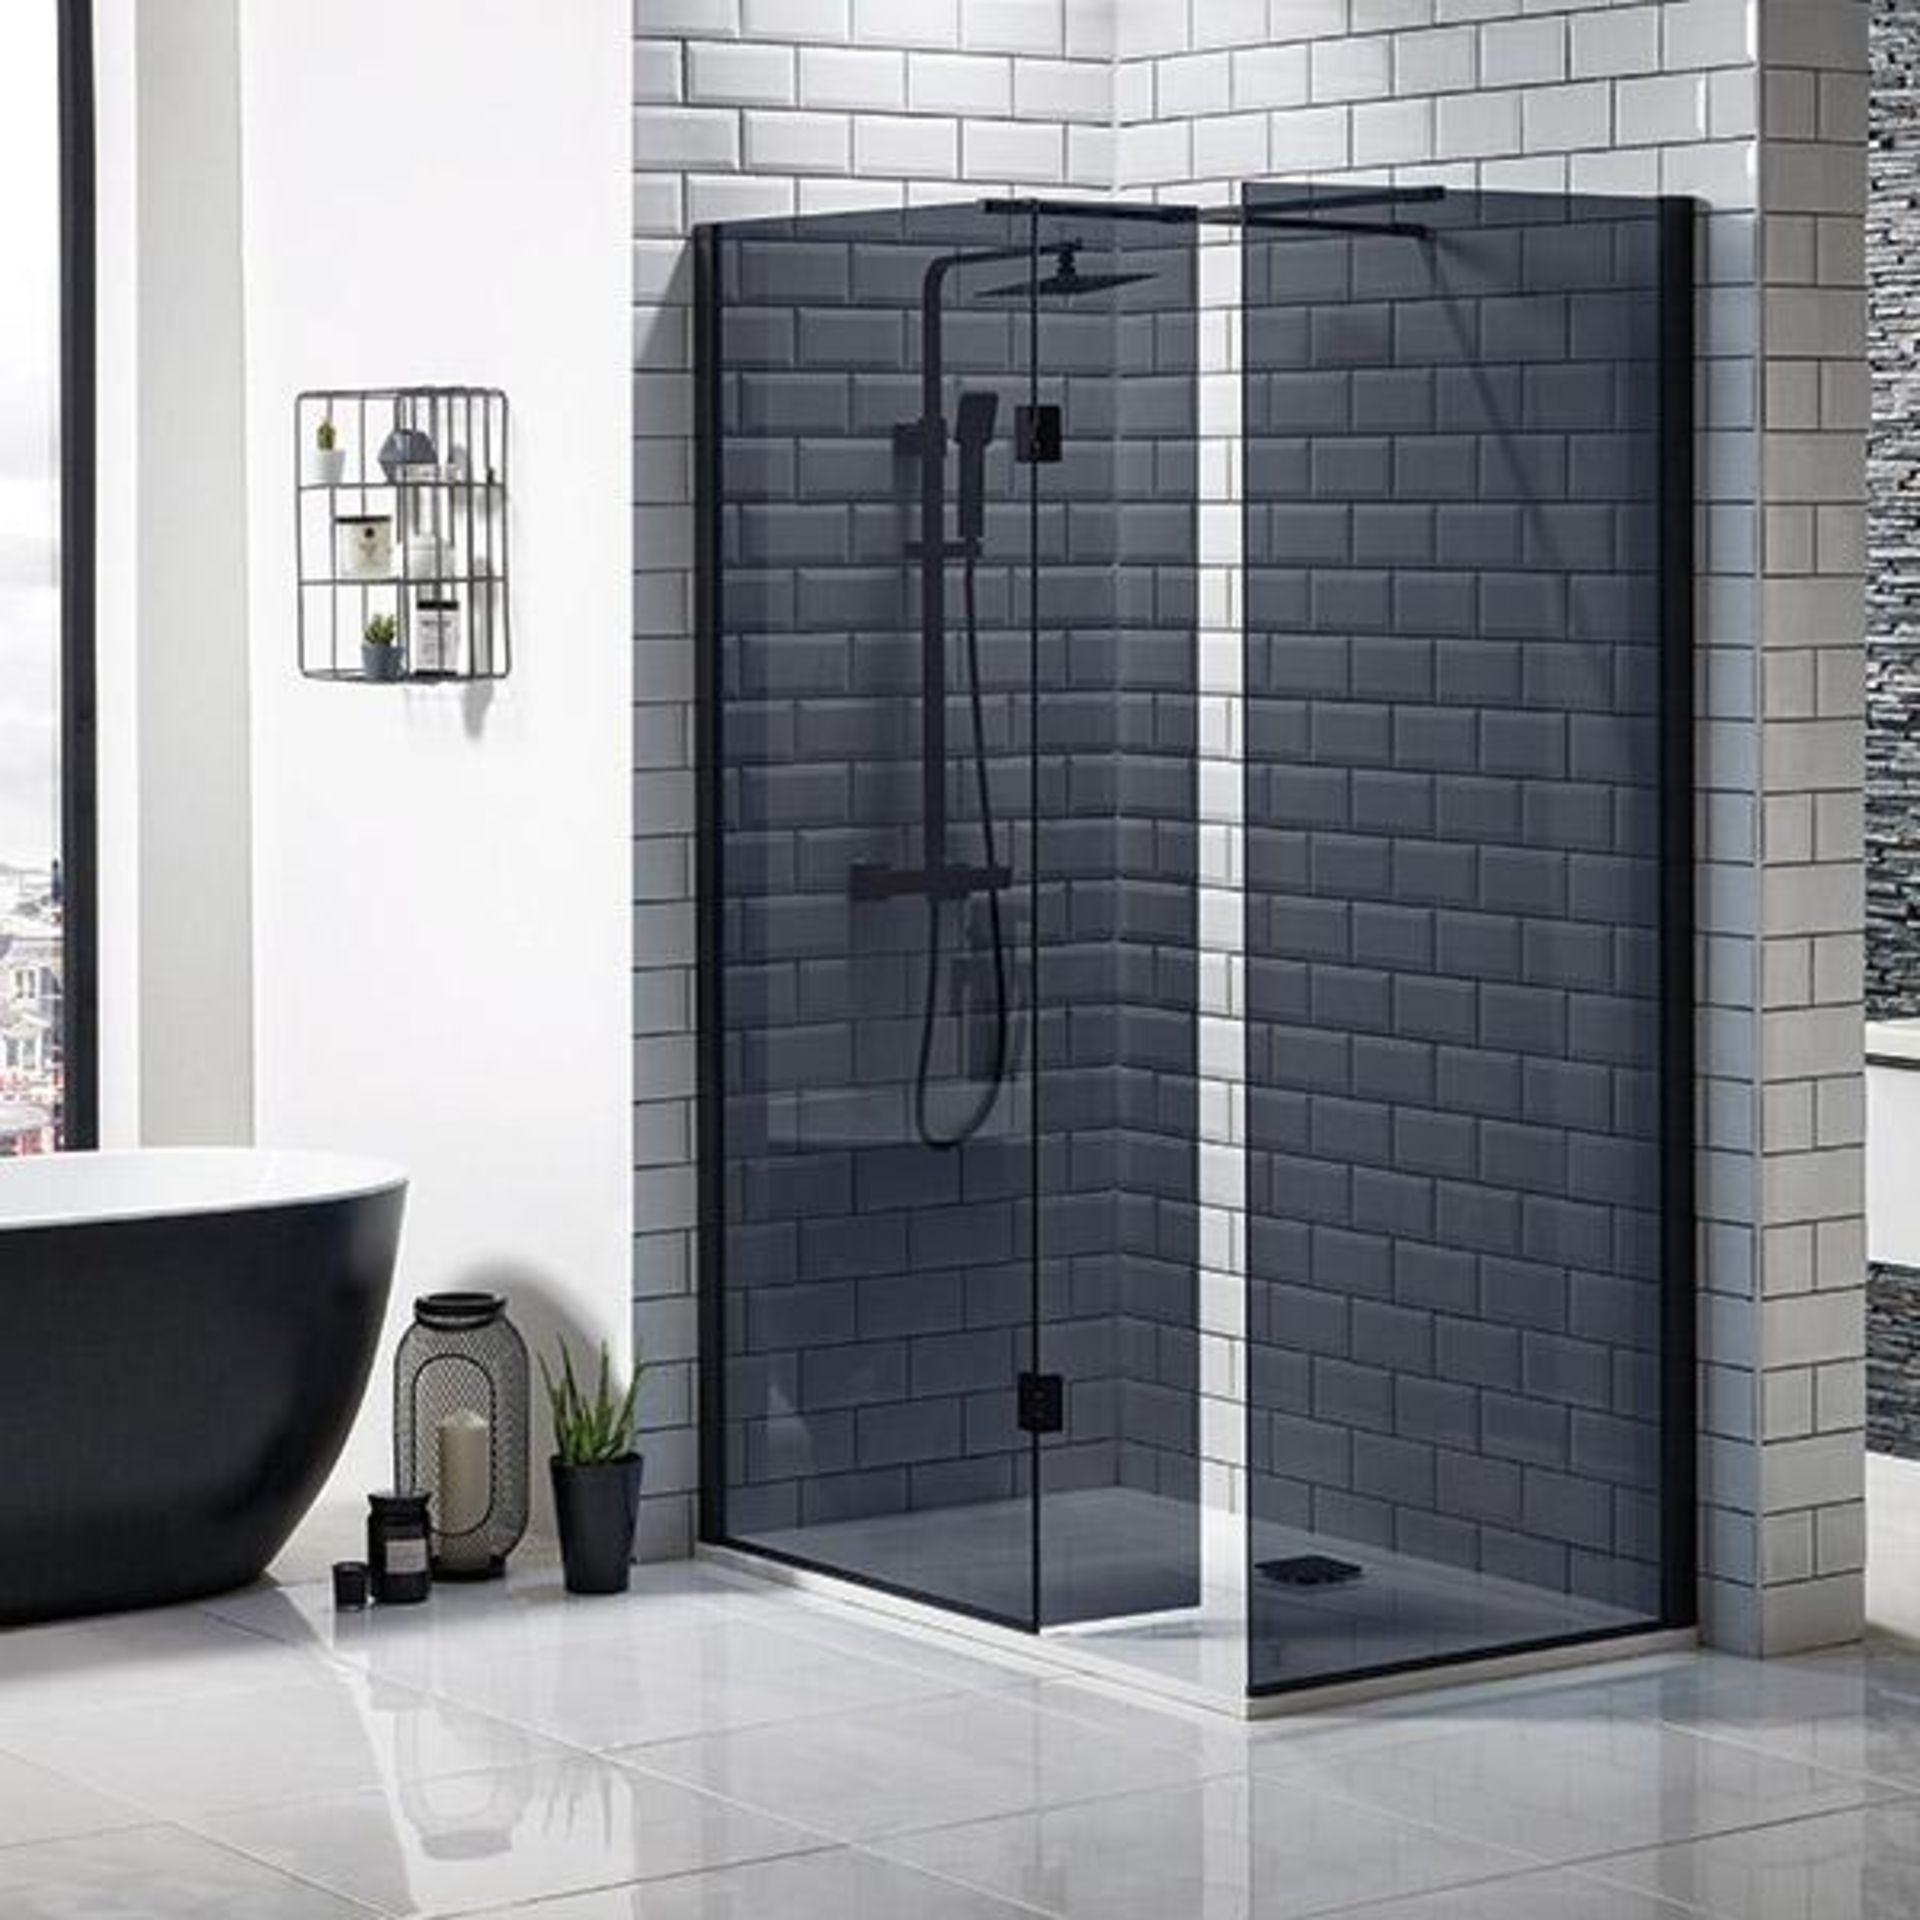 1 x Scudo BLK18 Wetroom Pack (1000x2000) & Flipper (275 x 2000) 8mm / (S8 1000mm Wetroom with 275mm